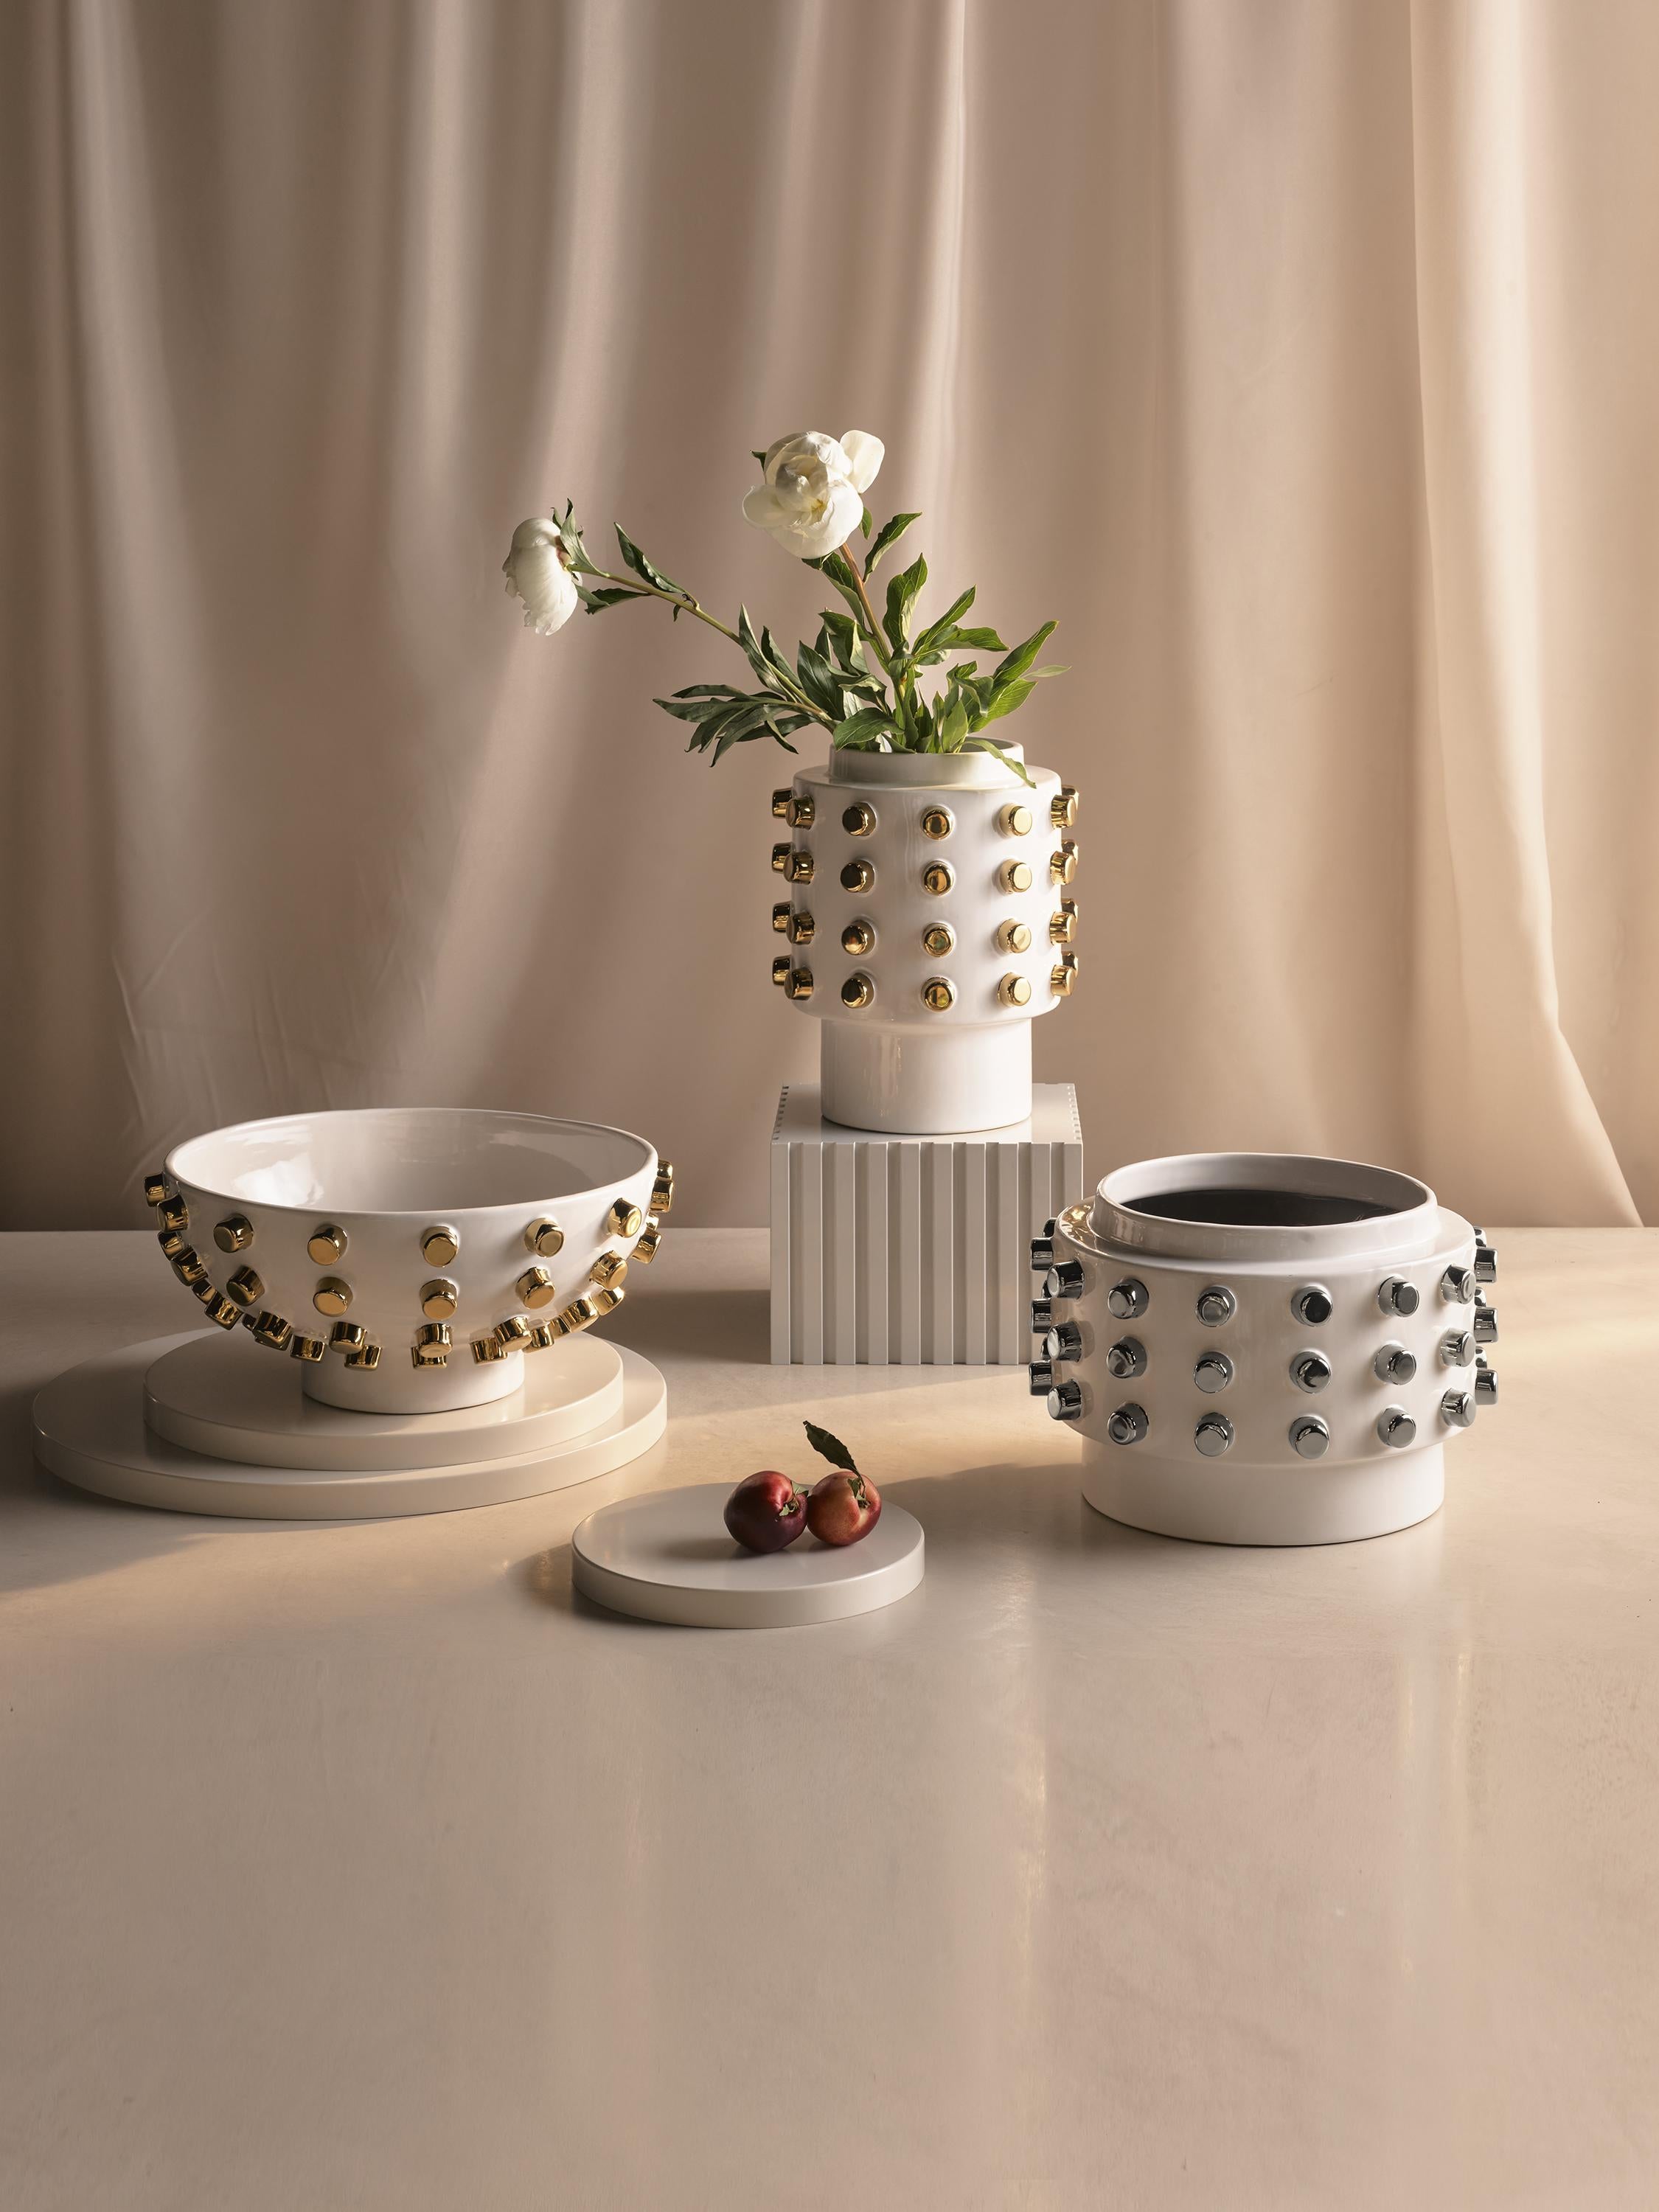 Channelling the raw and rebellious energy of New York’s post-punk scene, the Debbie collection pays tribute to the legendary Blondie frontwoman with a mix of rock-and-roll audacity and sleek downtown style. The bowls, vases and planters are